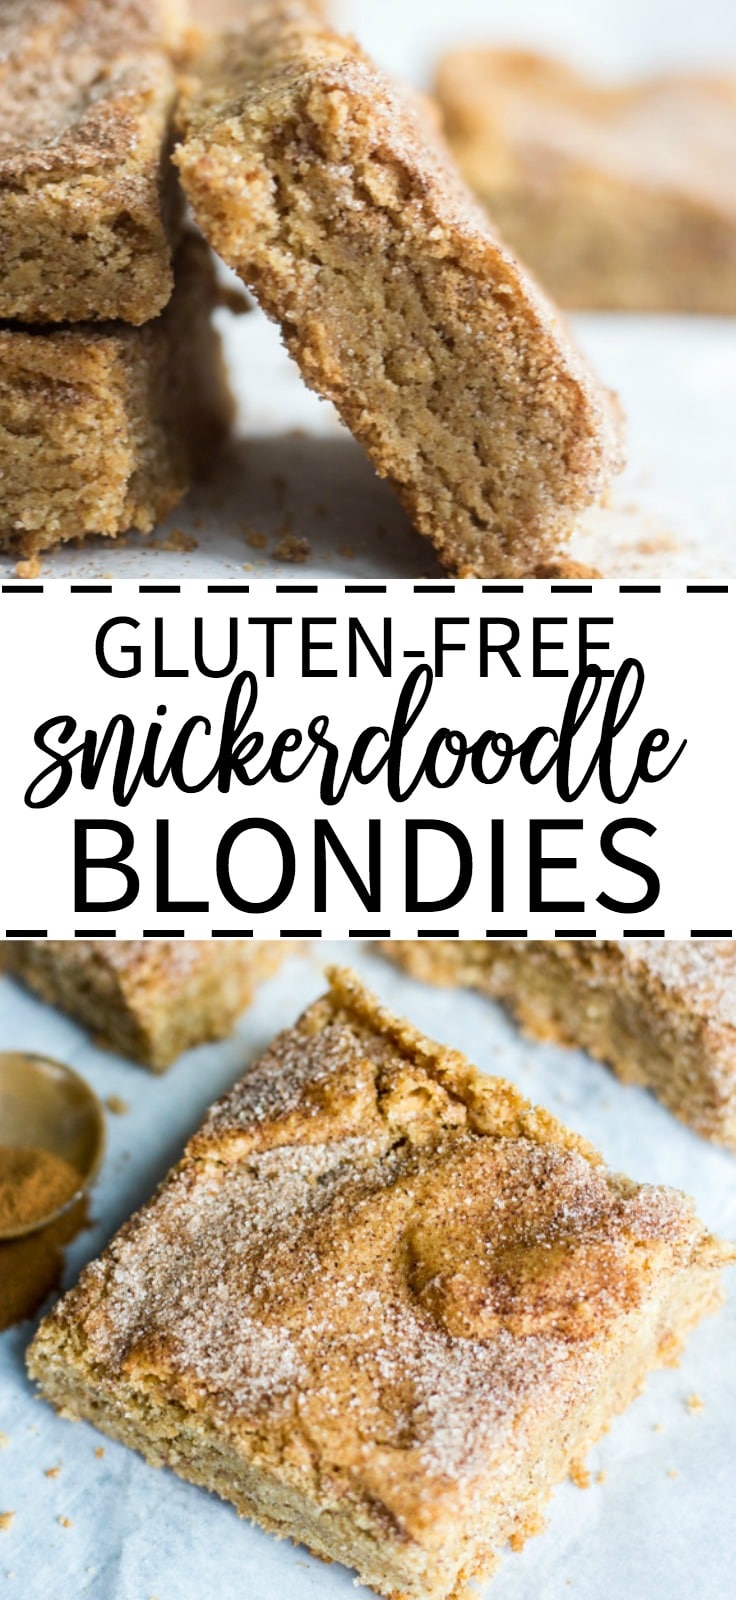 Thick and chewy, these gluten free snickerdoodle blondies are filled with all the flavor and texture you crave from a blondie recipe but don't include any of the gluten. They're filled with butter and brown sugar and lots of cinnamon sugar. This easy recipe doesn't require any mixer and comes together in under 30 minutes. Cut into squares and serve! Keep in the freezer for up to two months.